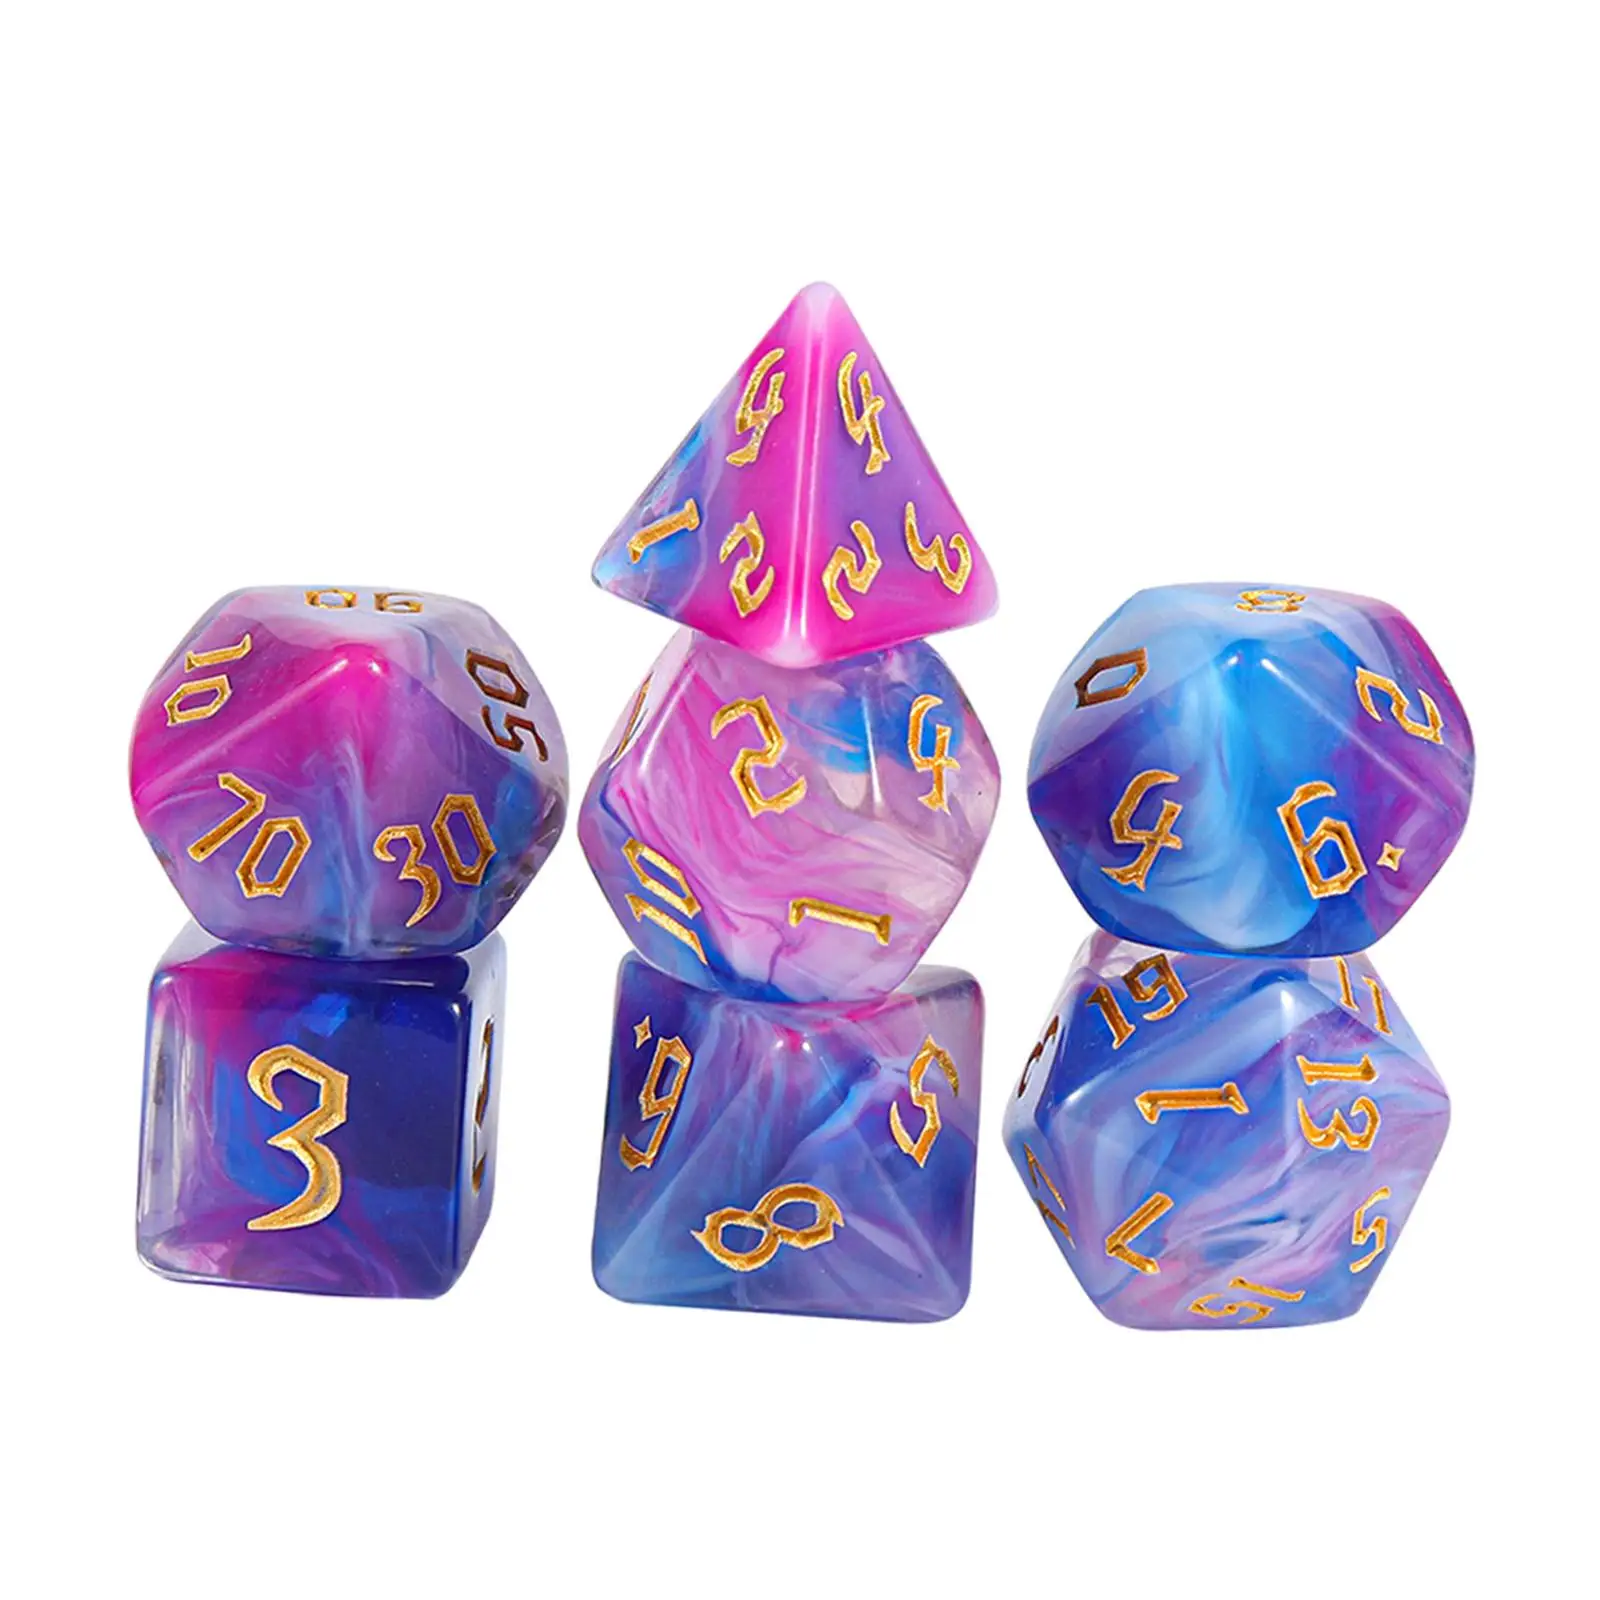 7x Multi Sided Dices Table Games Party Toys Acrylic Dices D4 D8 D10 D12 D20 Dices for RPG Role Playing Teaching Card Games